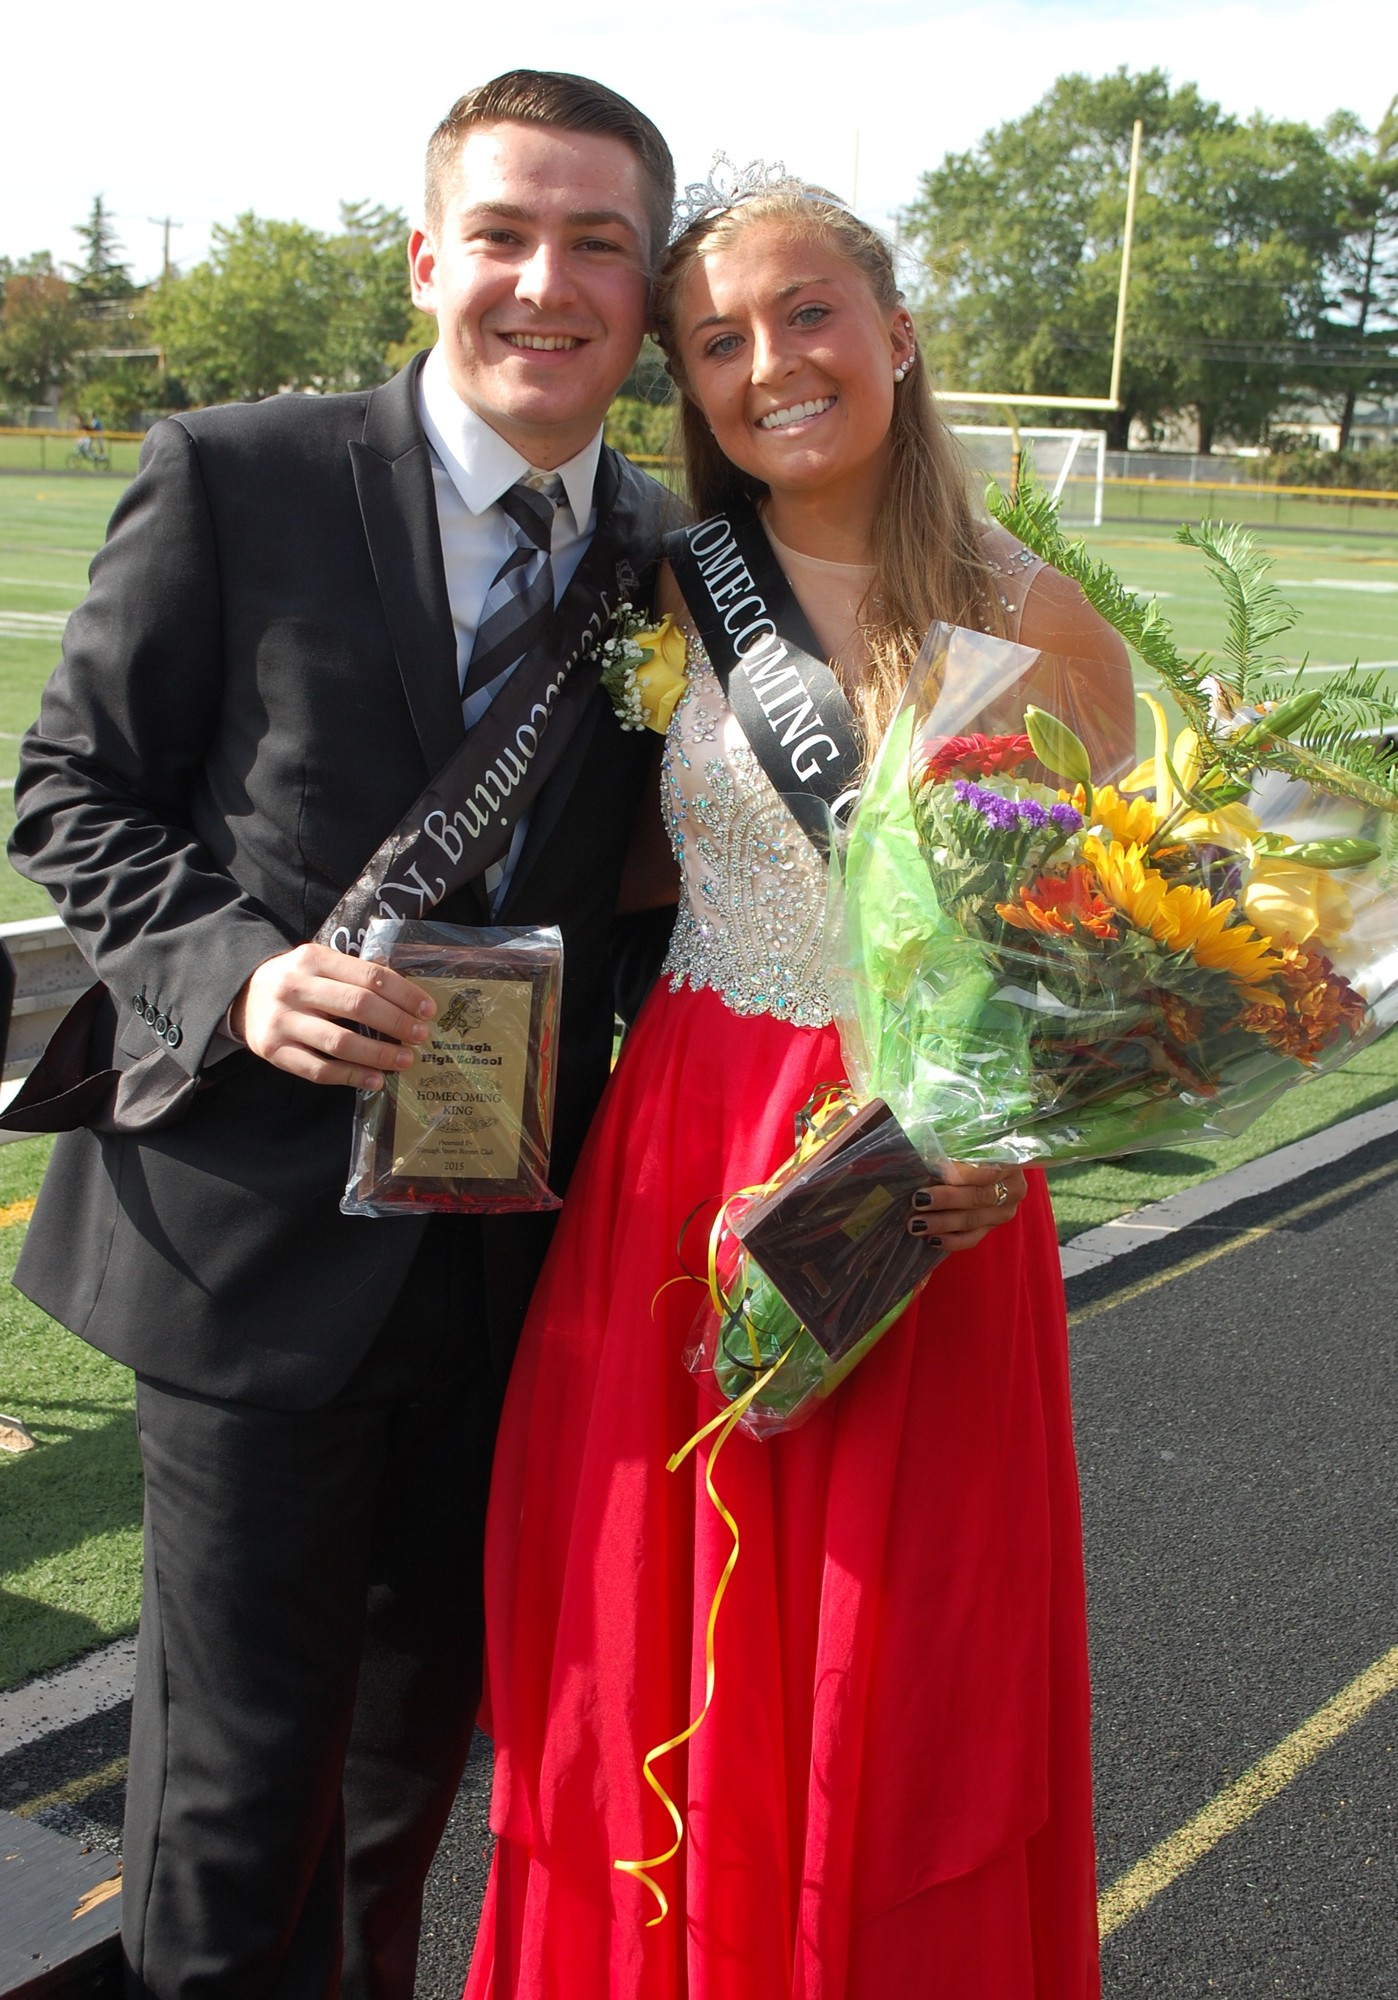 Luca DiMatteo and Nikki Sliwak were crowned Homecoming King and Queen.